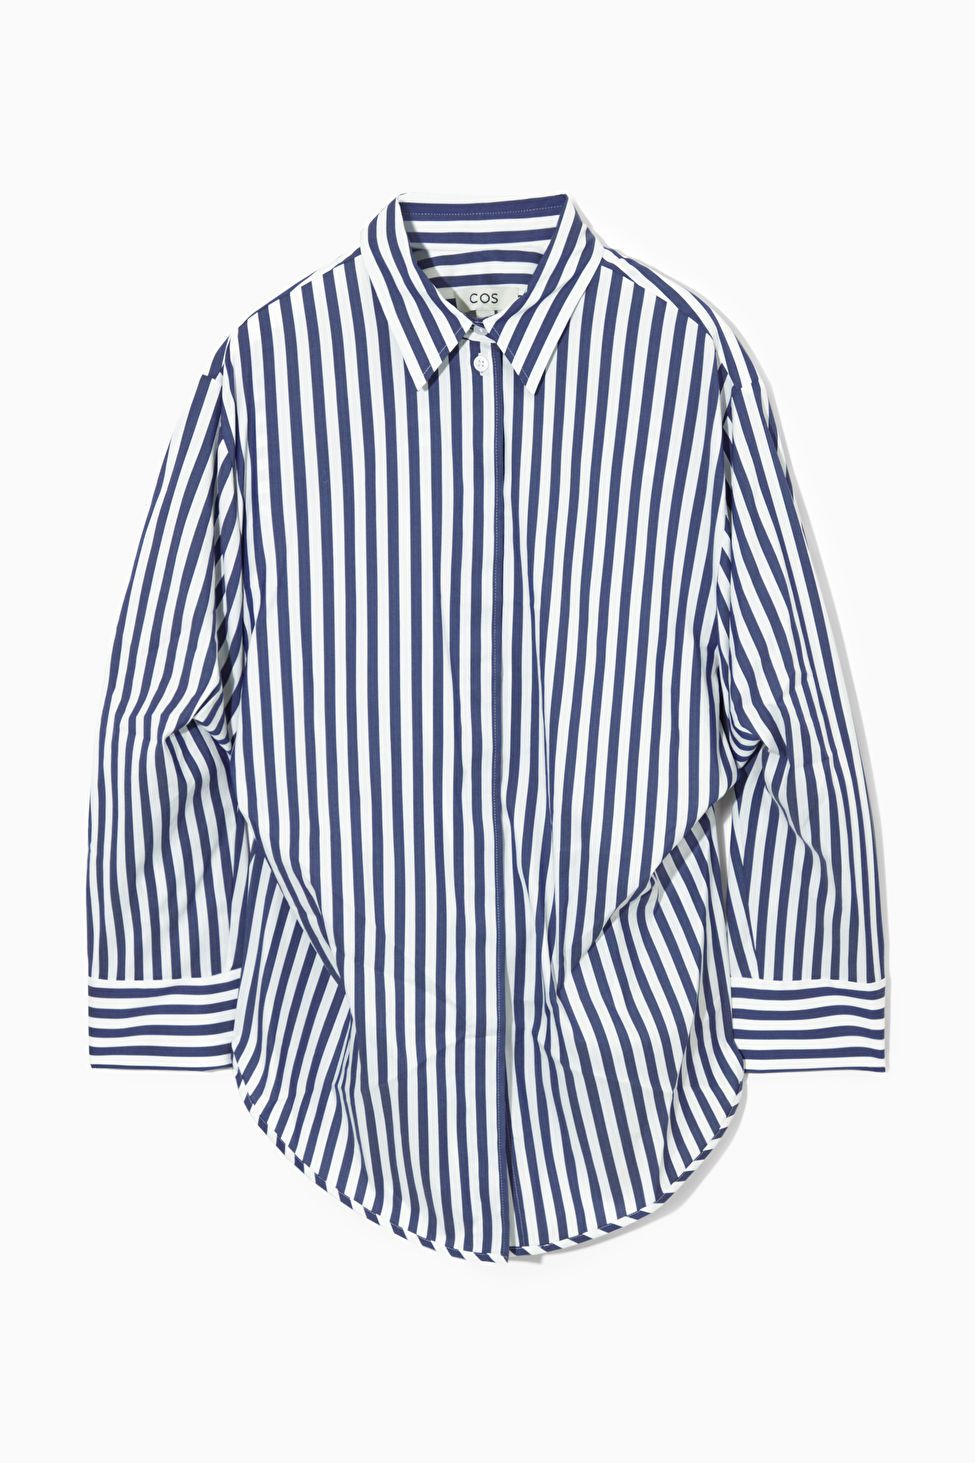 OVERSIZED WAISTED STRIPED SHIRT - BLUE / WHITE / STRIPED - COS | COS UK